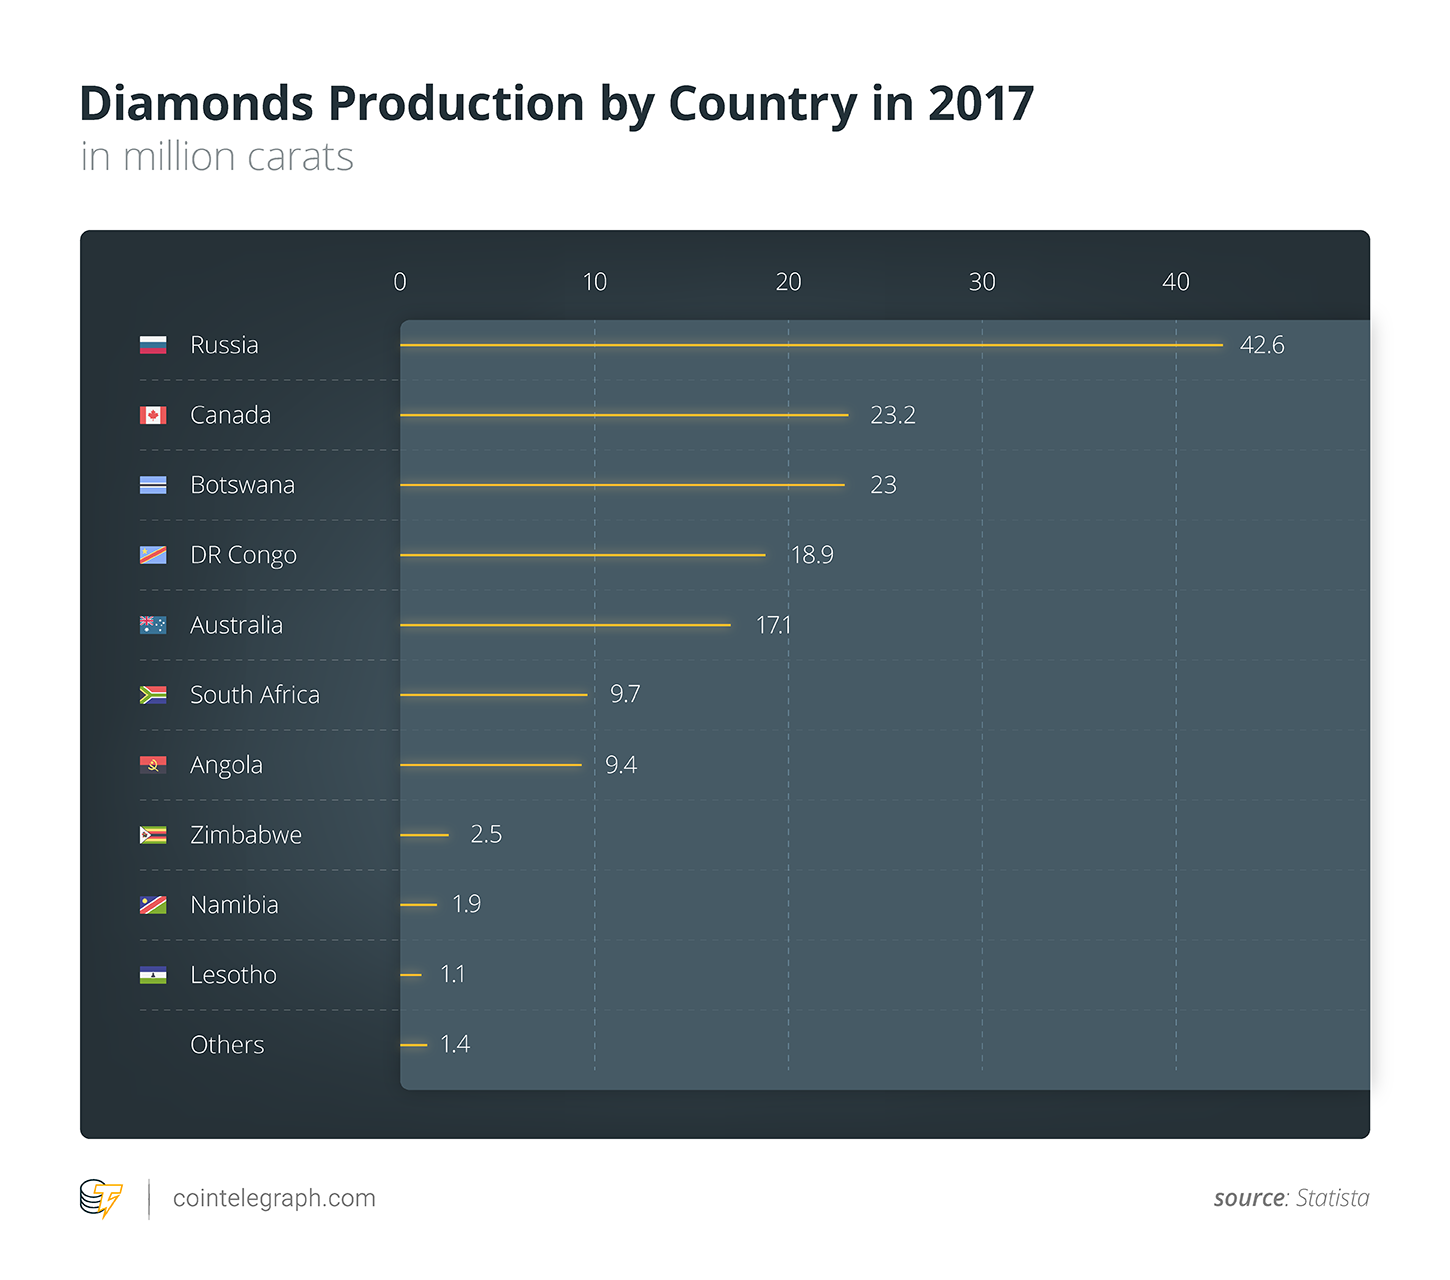 Diamonds Production by Country in 2017